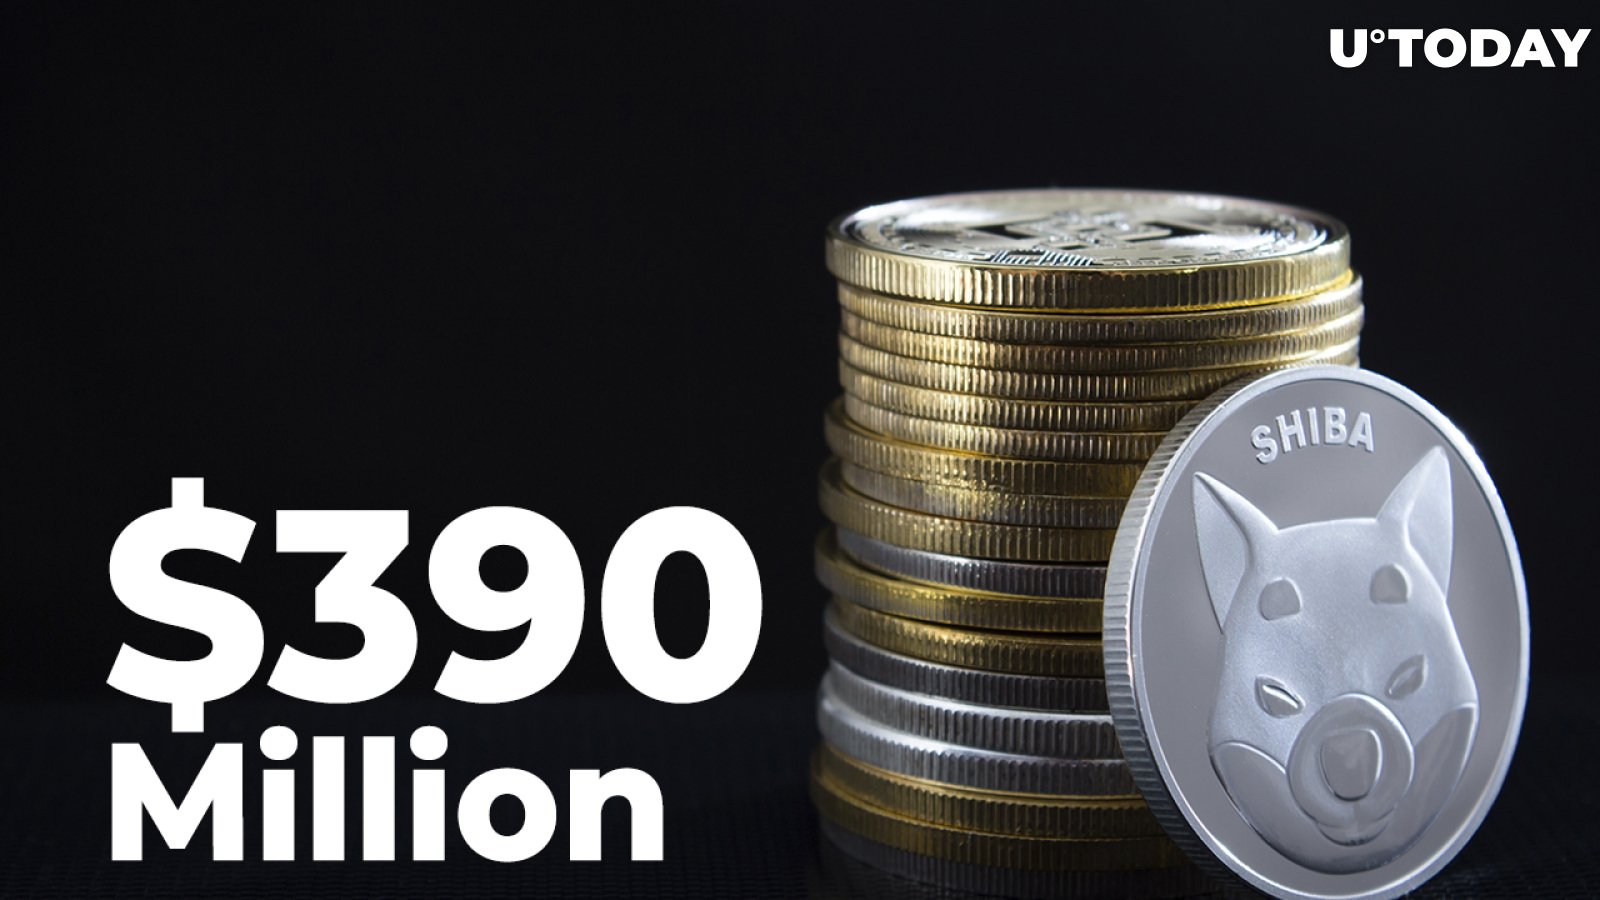 Shiba Inu Large Transactions Rise to Nearly $390 Million, Accounting for 81% of On-Chain Volume